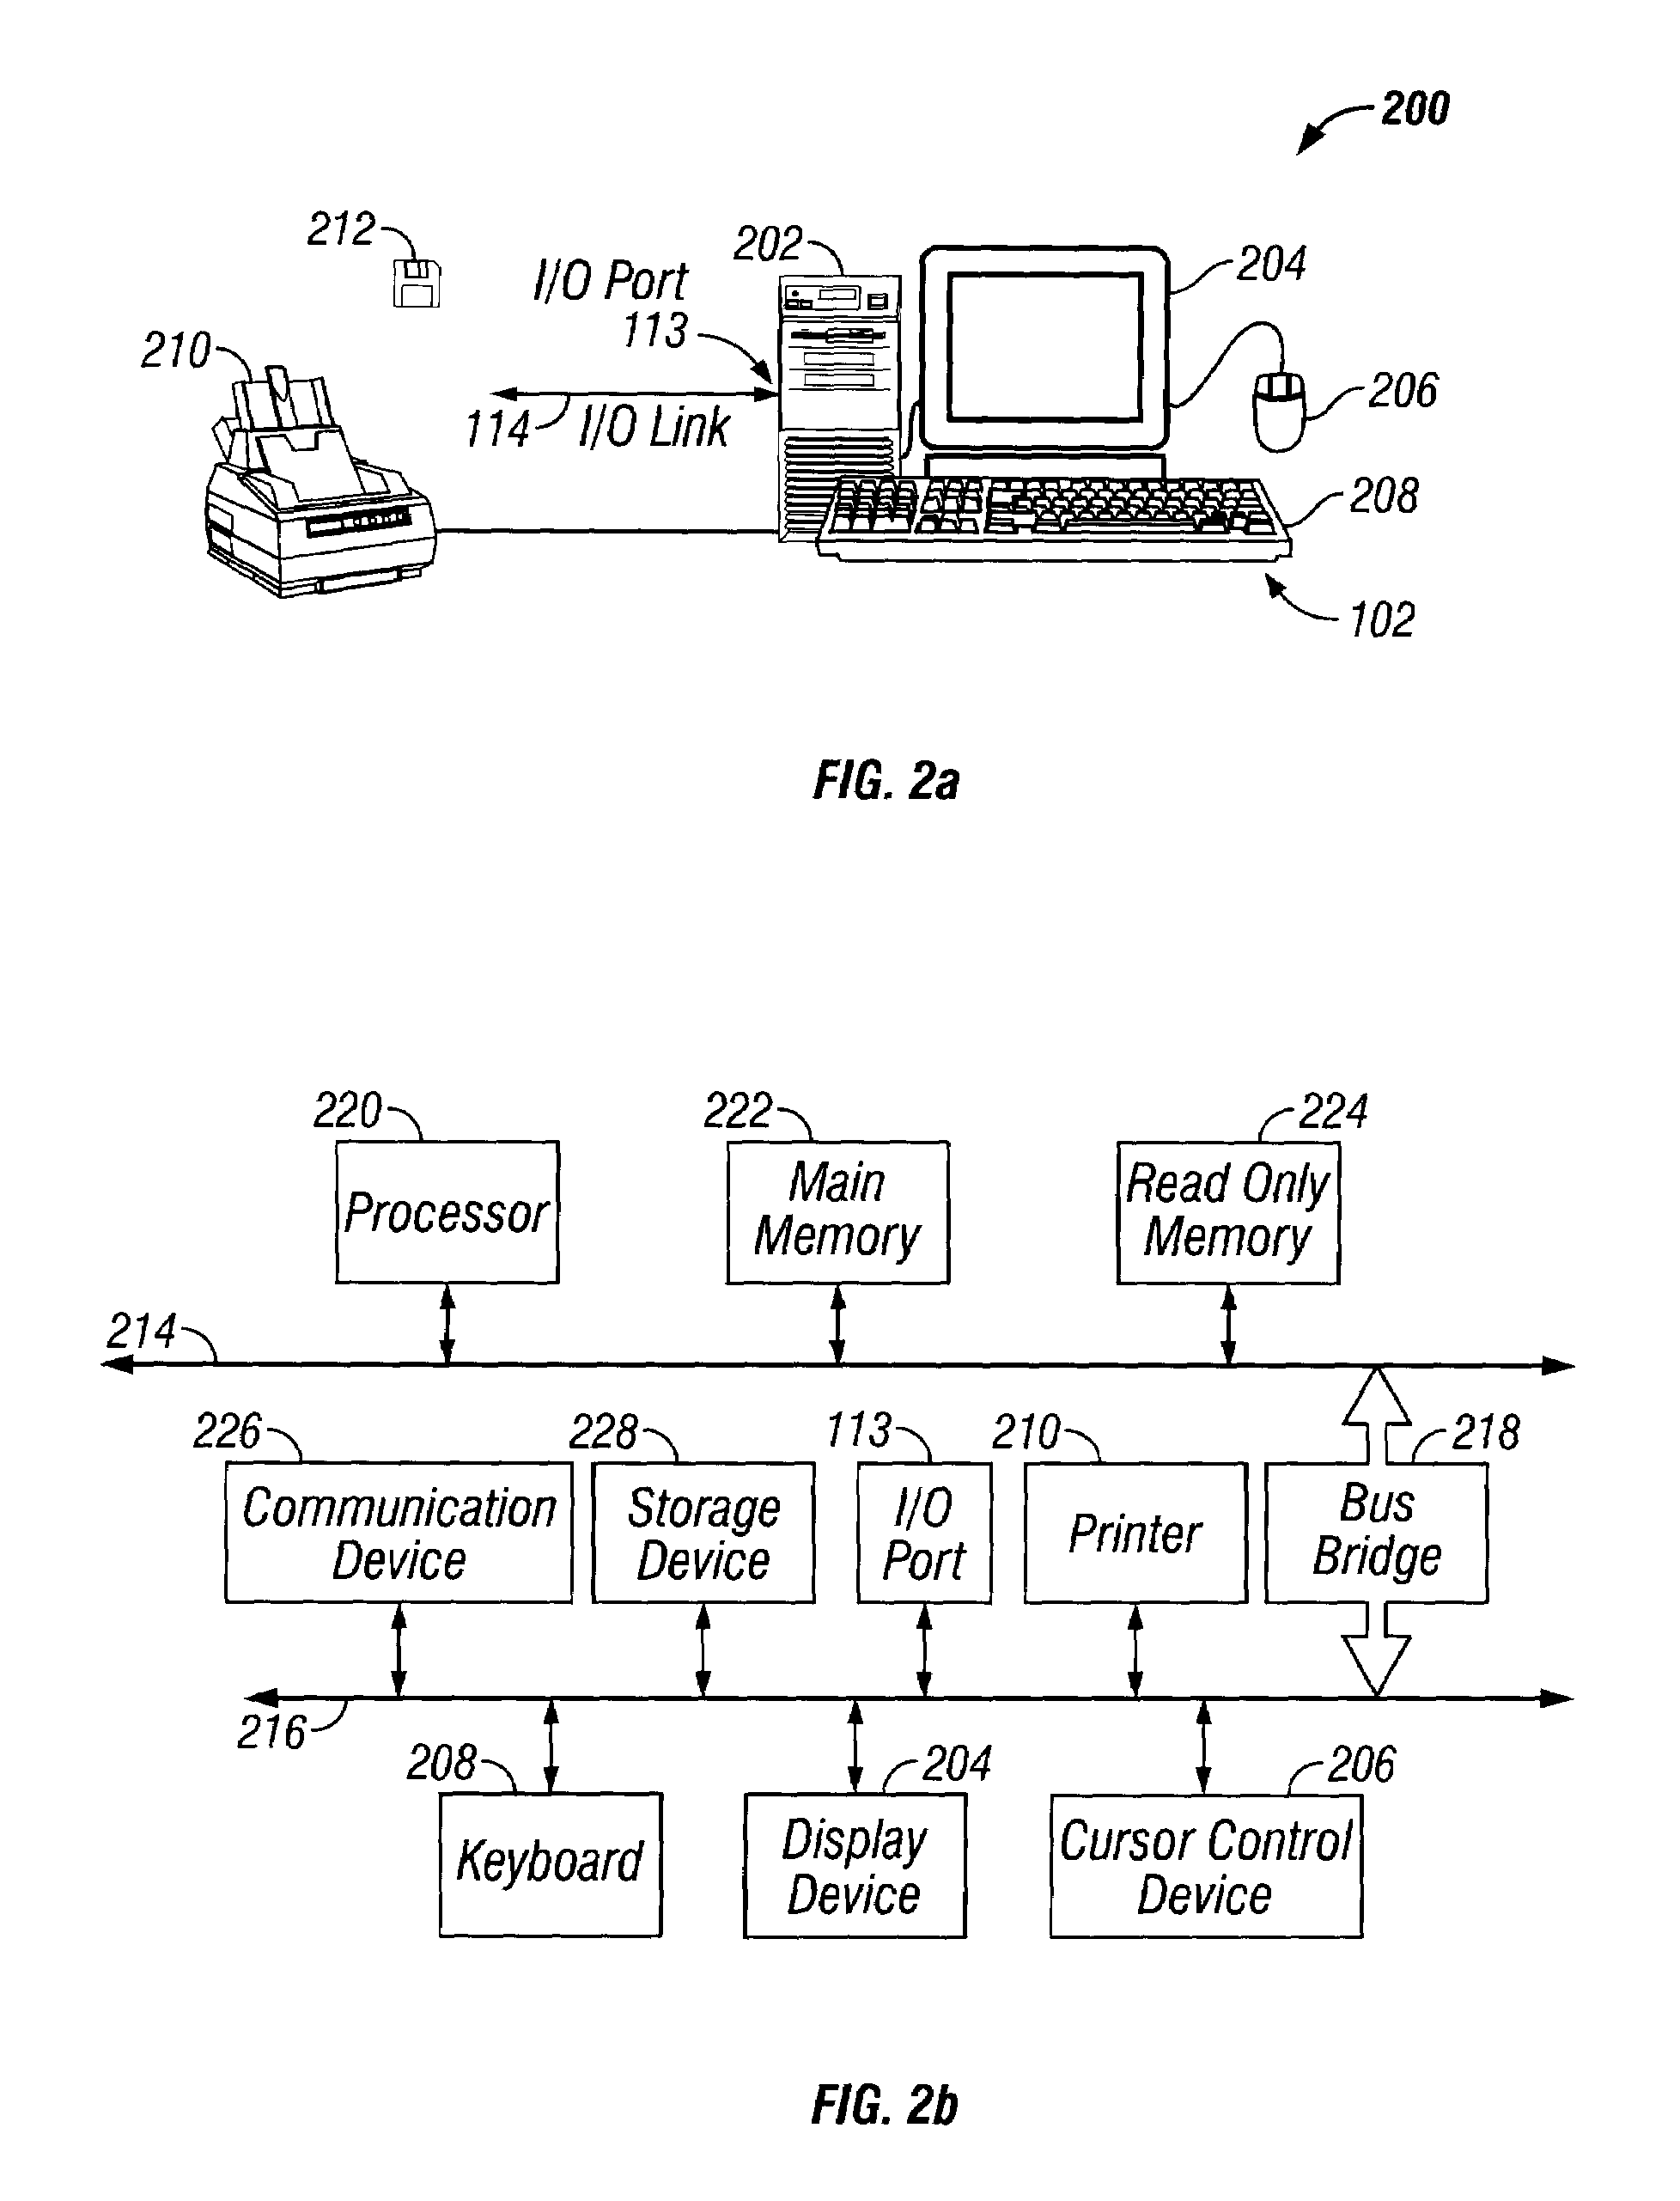 System, device, and method for providing secure electronic commerce transactions